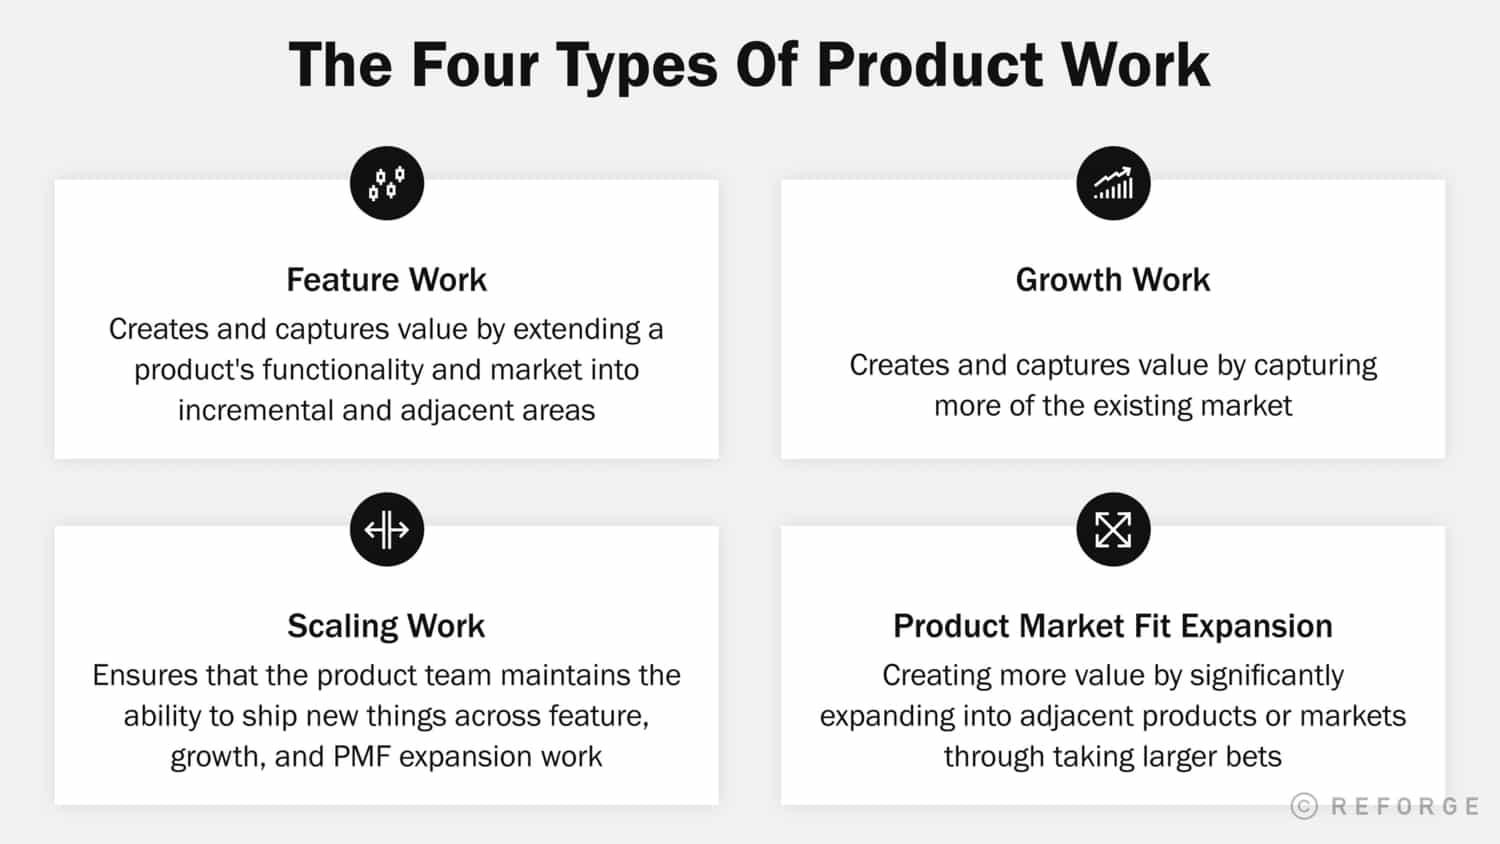 Source: The Growing Specialization of Product Management